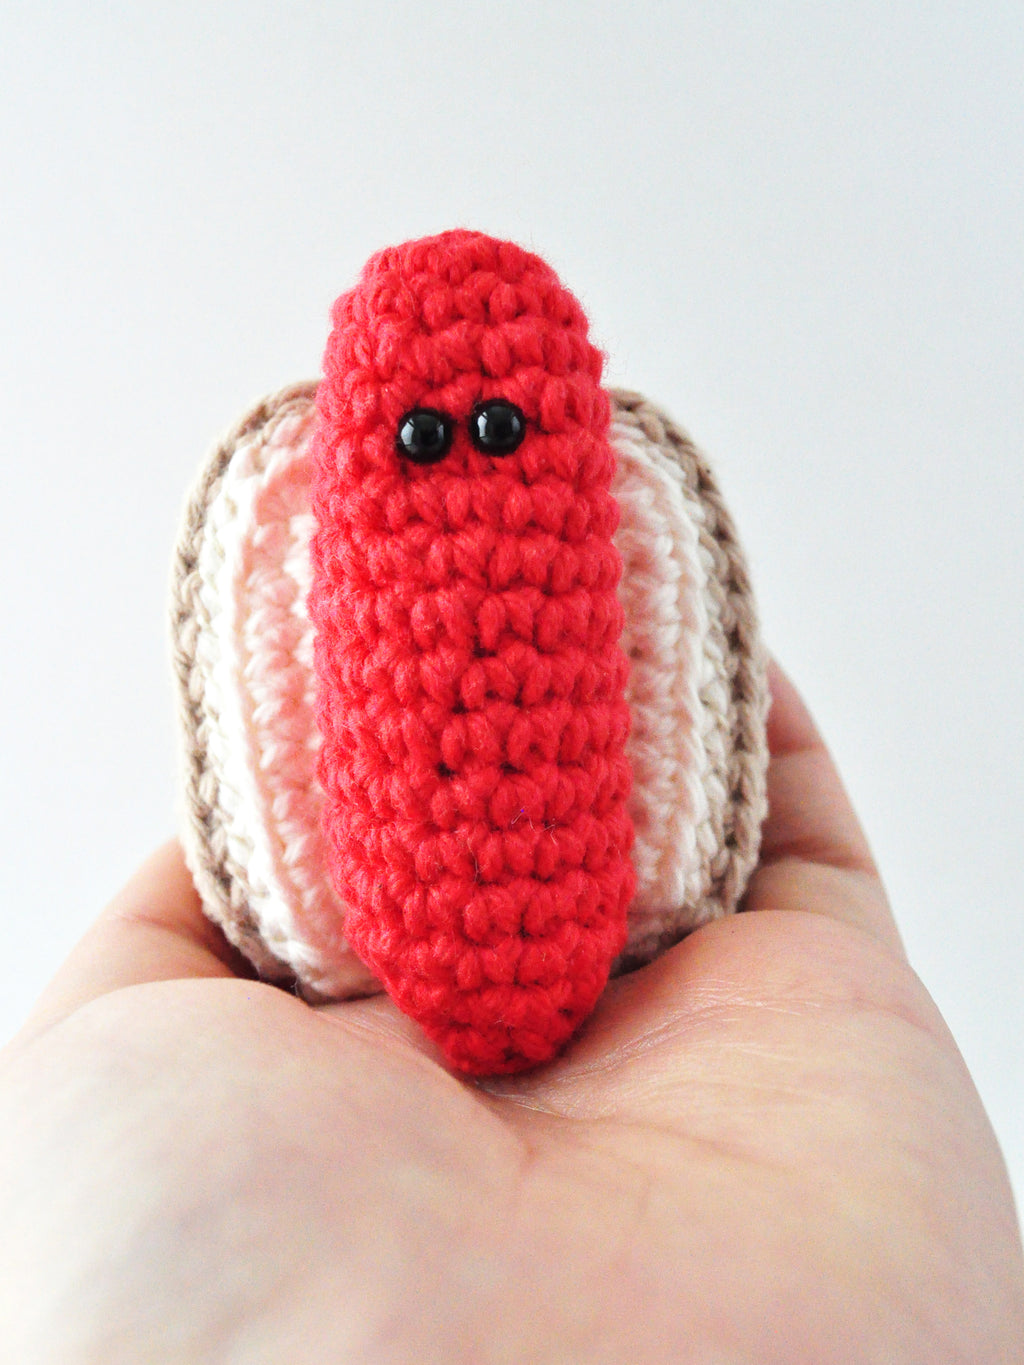 Hot dog crochet pattern with step by step photos